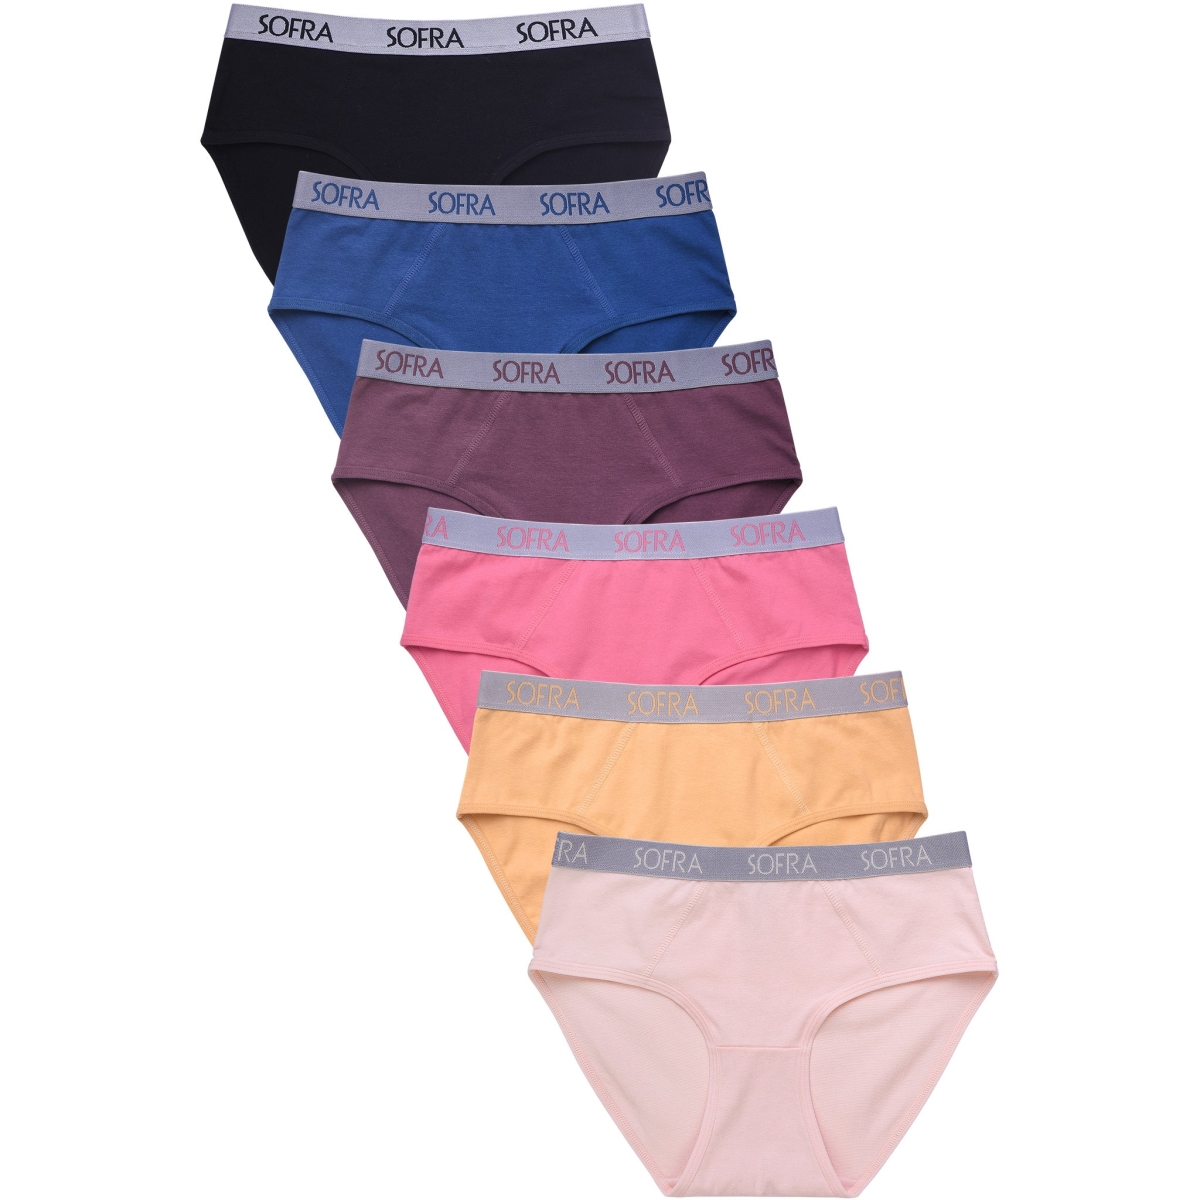 Picture of 247 Frenzy 247-LP1421CKE4-XL Womens Essentials Cotton Stretch Bikini Panty Underwear with Extended Side Seams - Assorted Color - Extra Large - Pack of 6